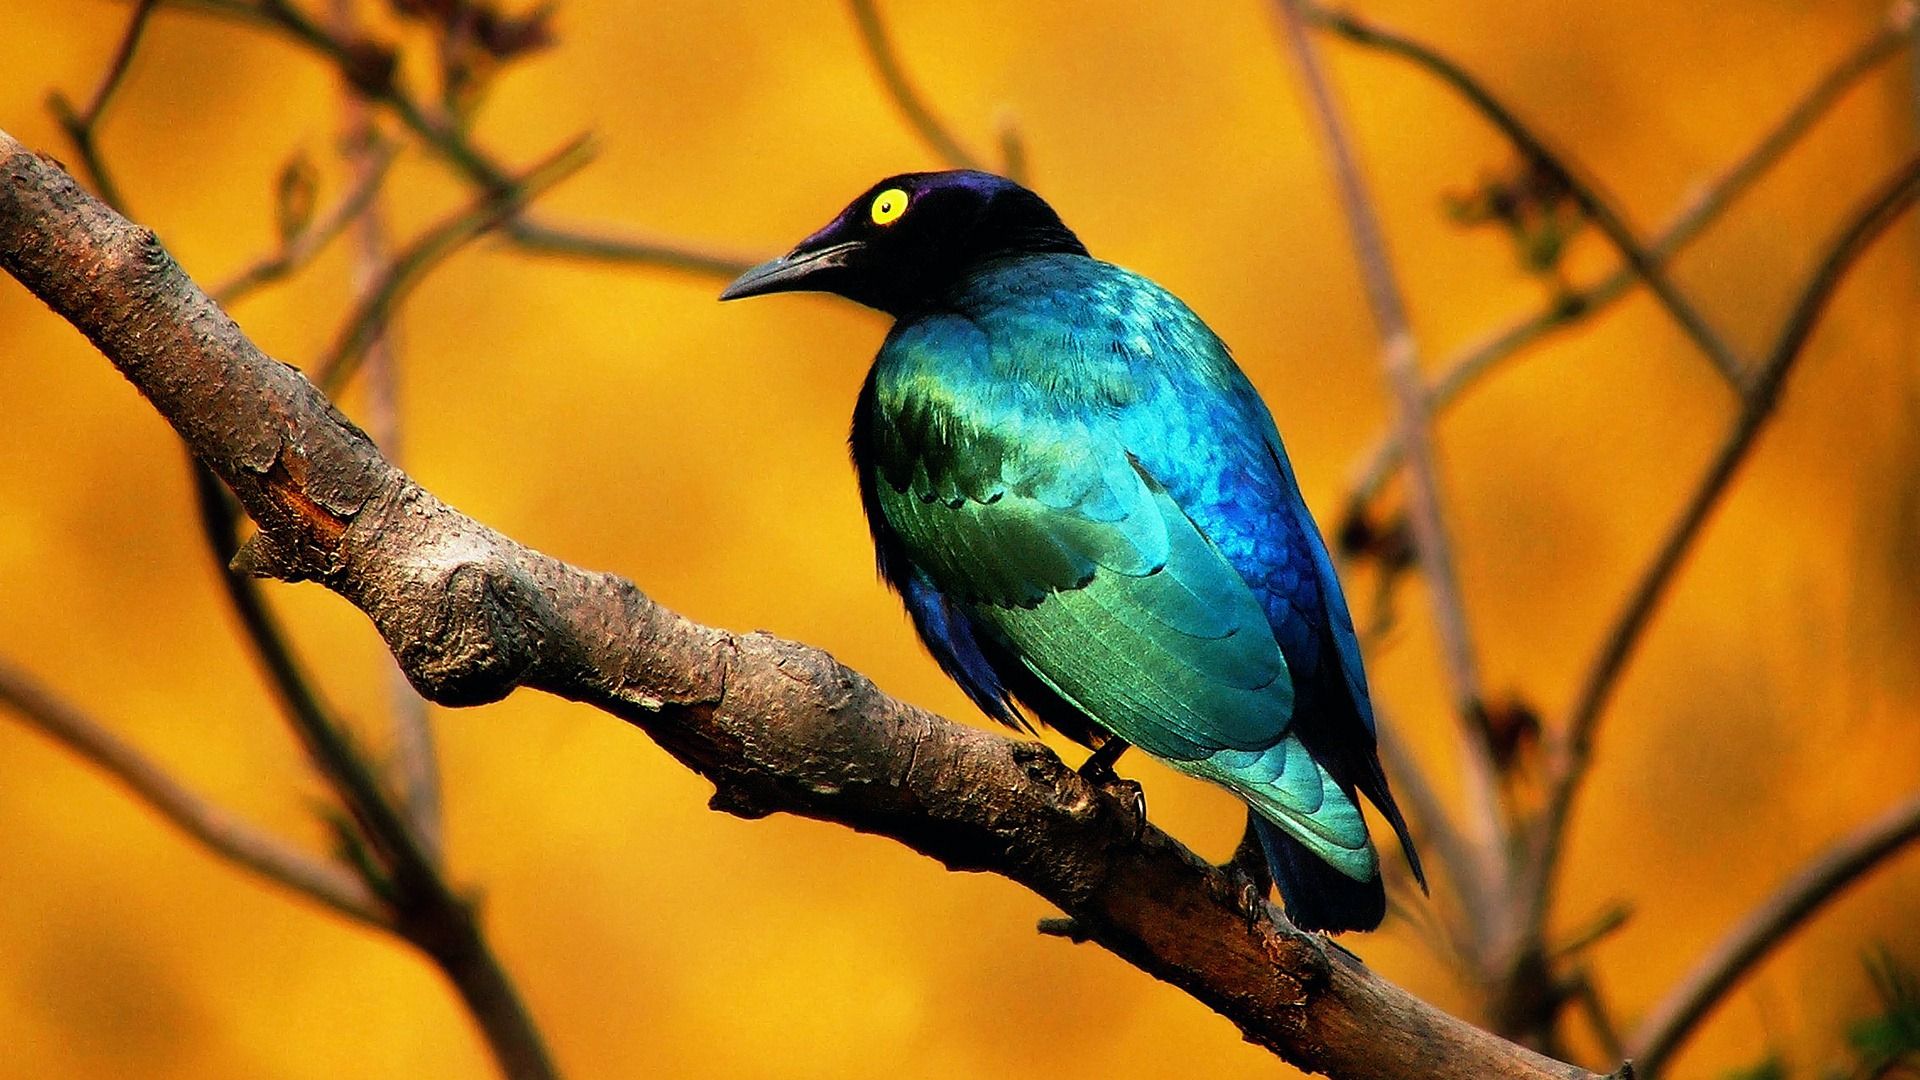 Top 10 HD Birds Wallpapers | Live HD Wallpaper HQ Pictures, Images ...